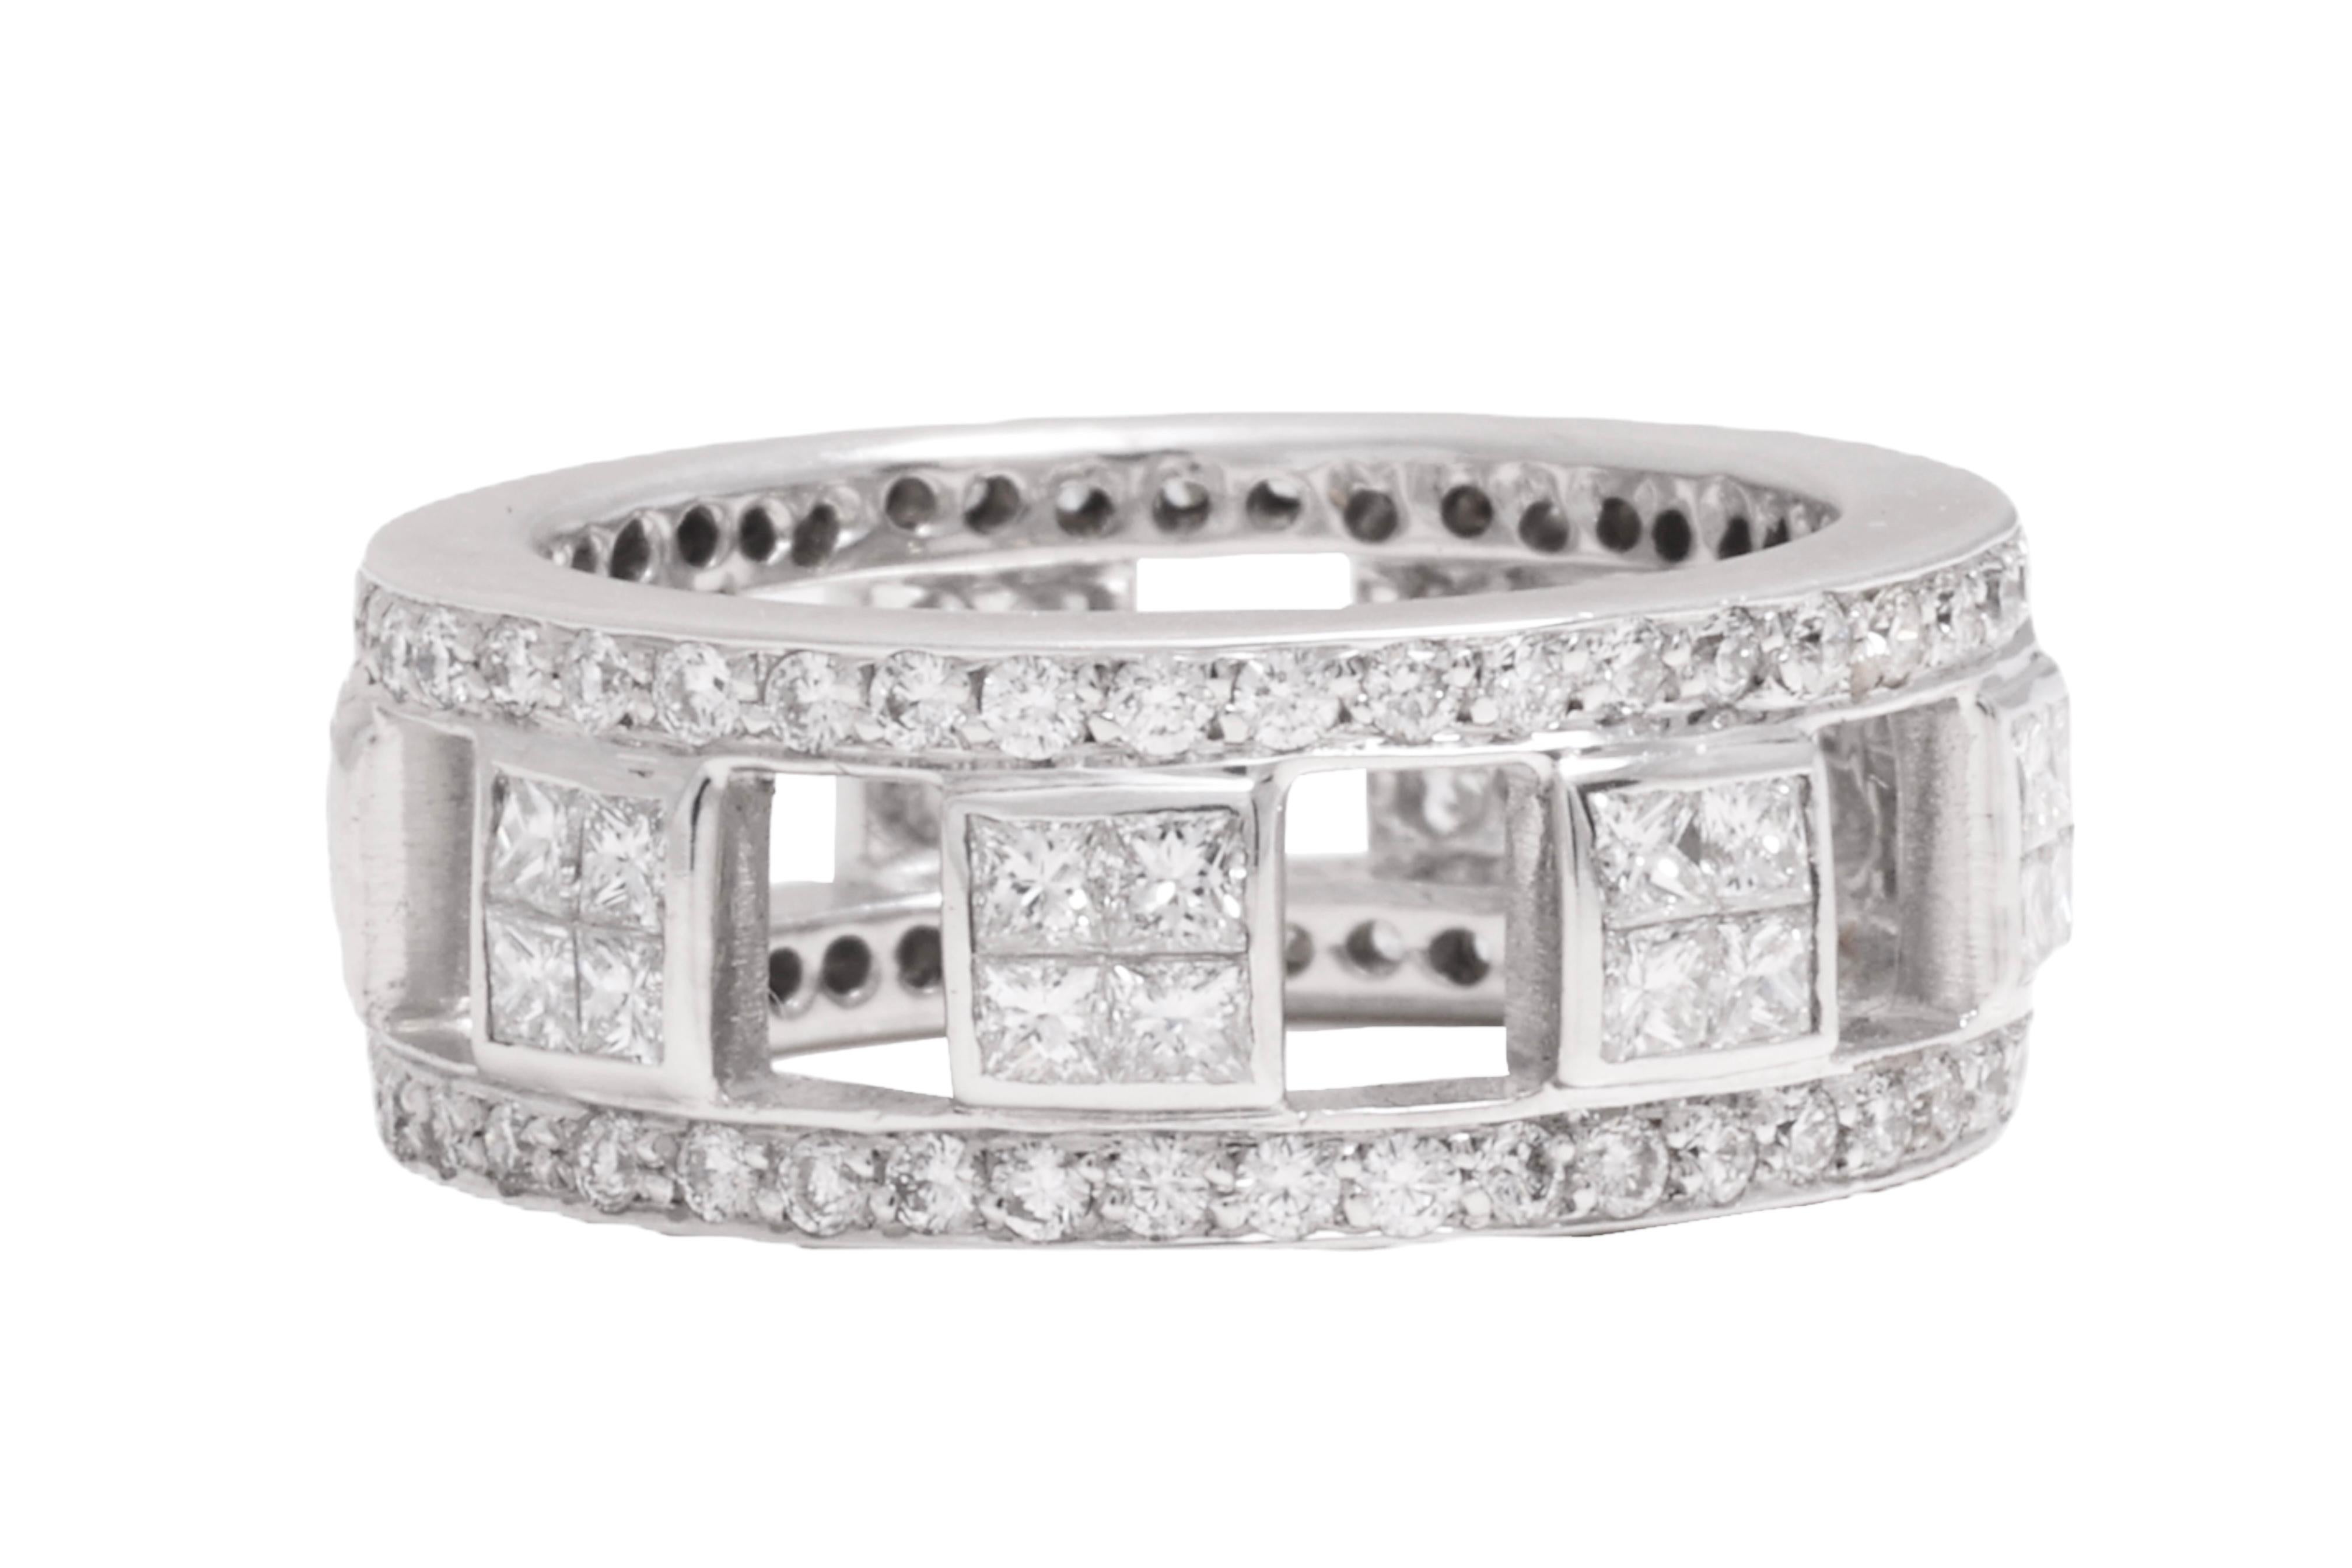 Gorgeous 18 kt. White Gold Eternity Ring With 1.92 ct. Diamonds

Diamonds: brilliant and princess cut diamonds, together approx. 1.92 ct.

Material: 18 kt white gold

Ring size: 51 EU / 5.75 US 

Total weight: 8.1 gram / 0.285 oz / 5.2 dwt